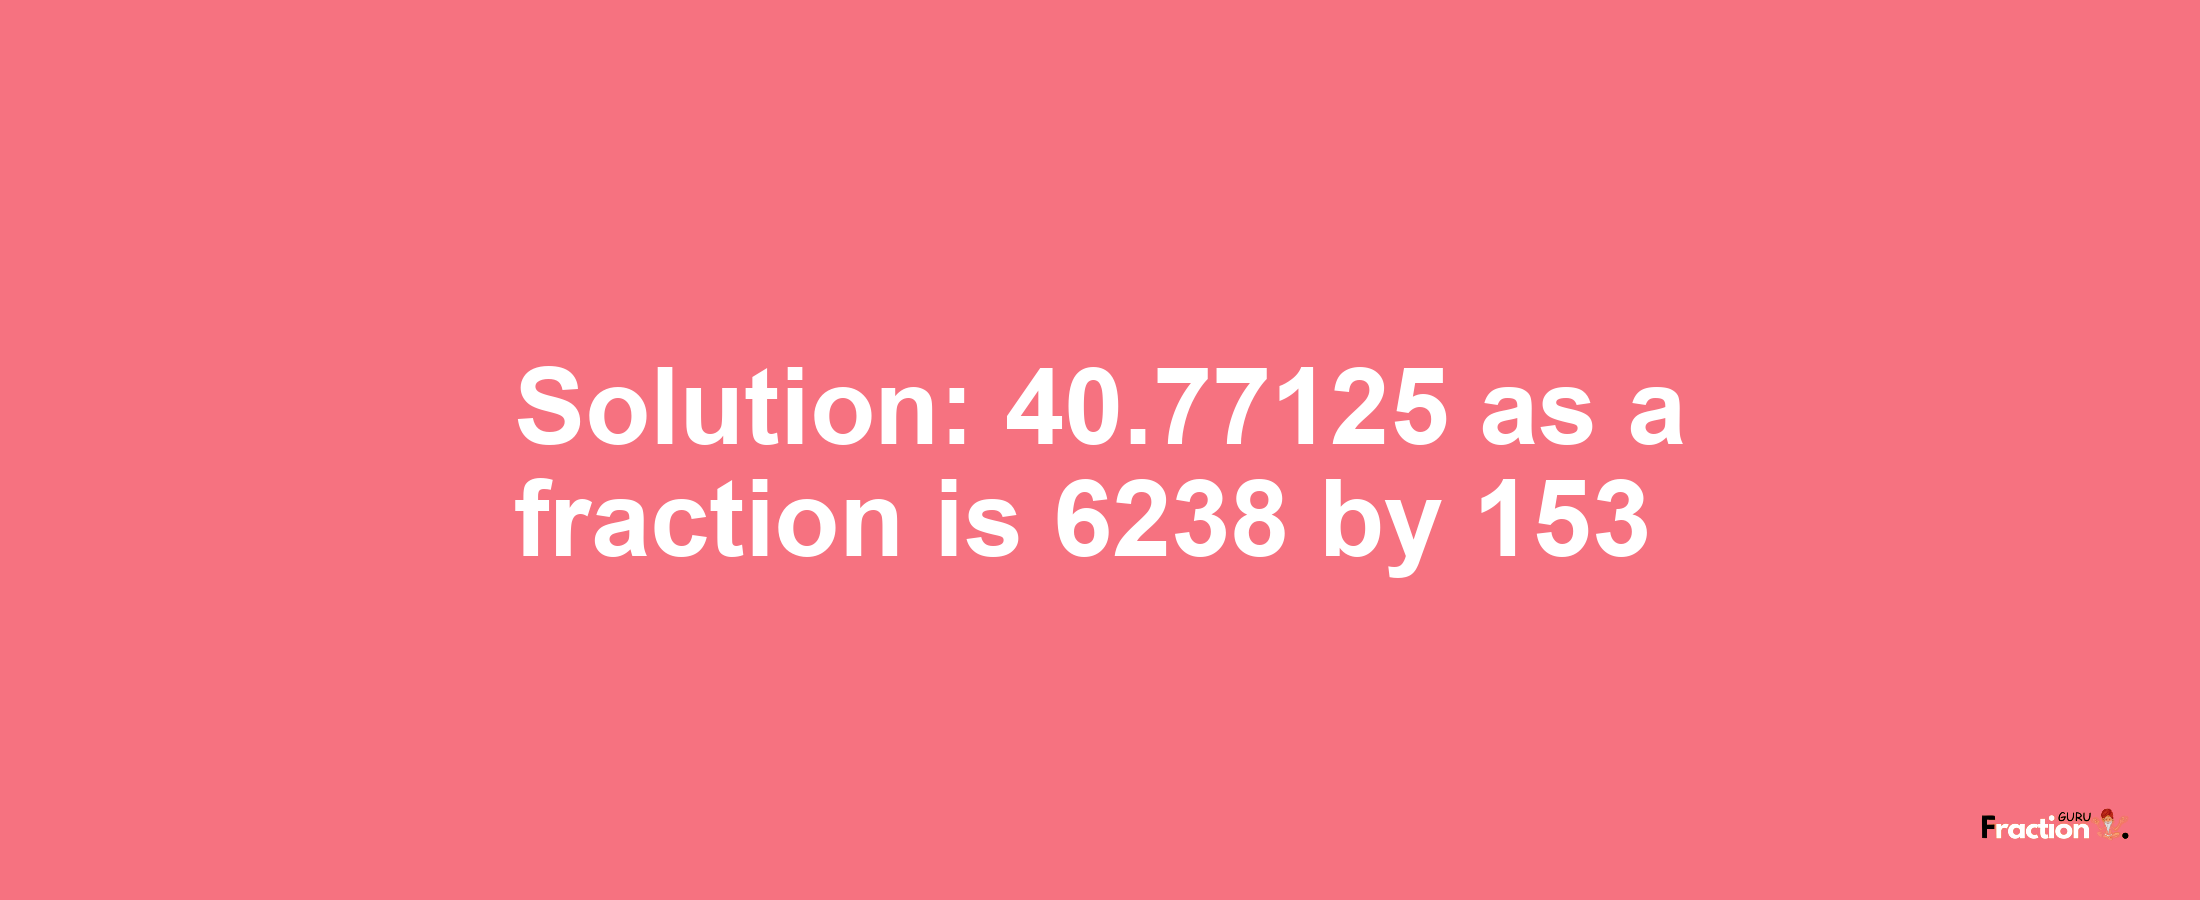 Solution:40.77125 as a fraction is 6238/153